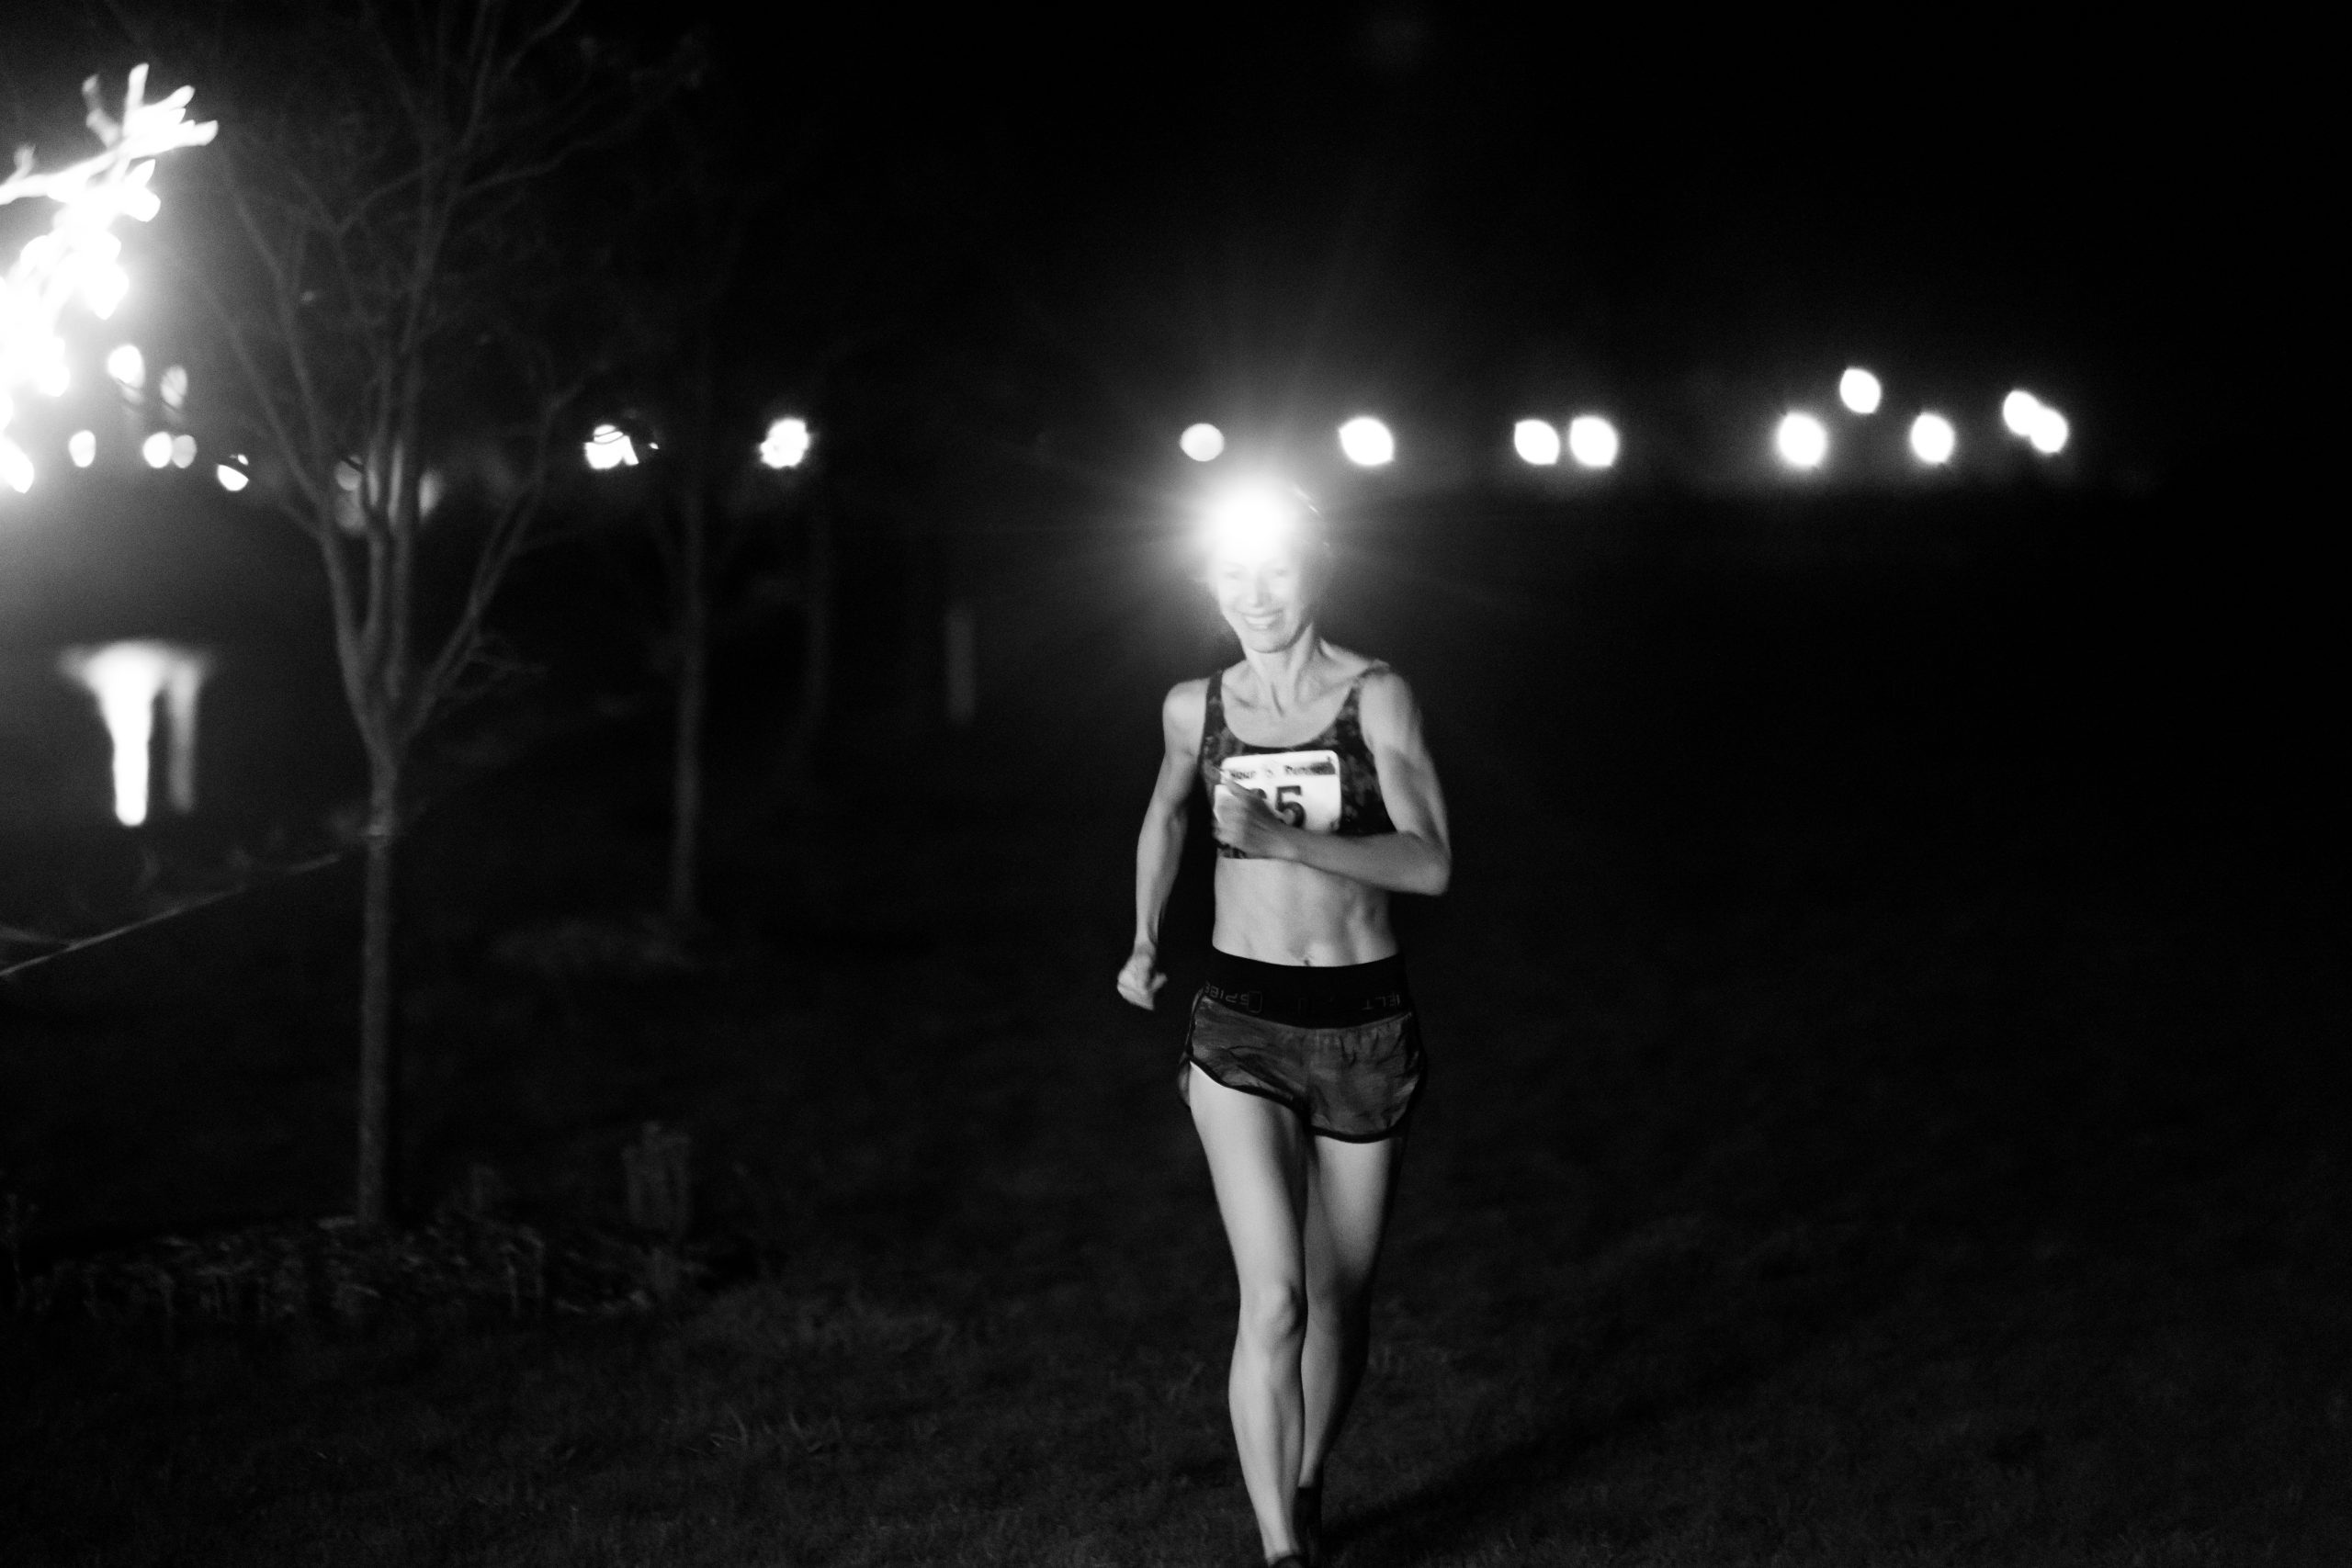 Oksana Loginova competes during last year's The 24 Hour Lions Roar, a competitive running event in Columbia, Missouri. She covered 107.5 miles in the event and finished 20 miles ahead of the next woman runner. Photo courtesy Avery Abbott.